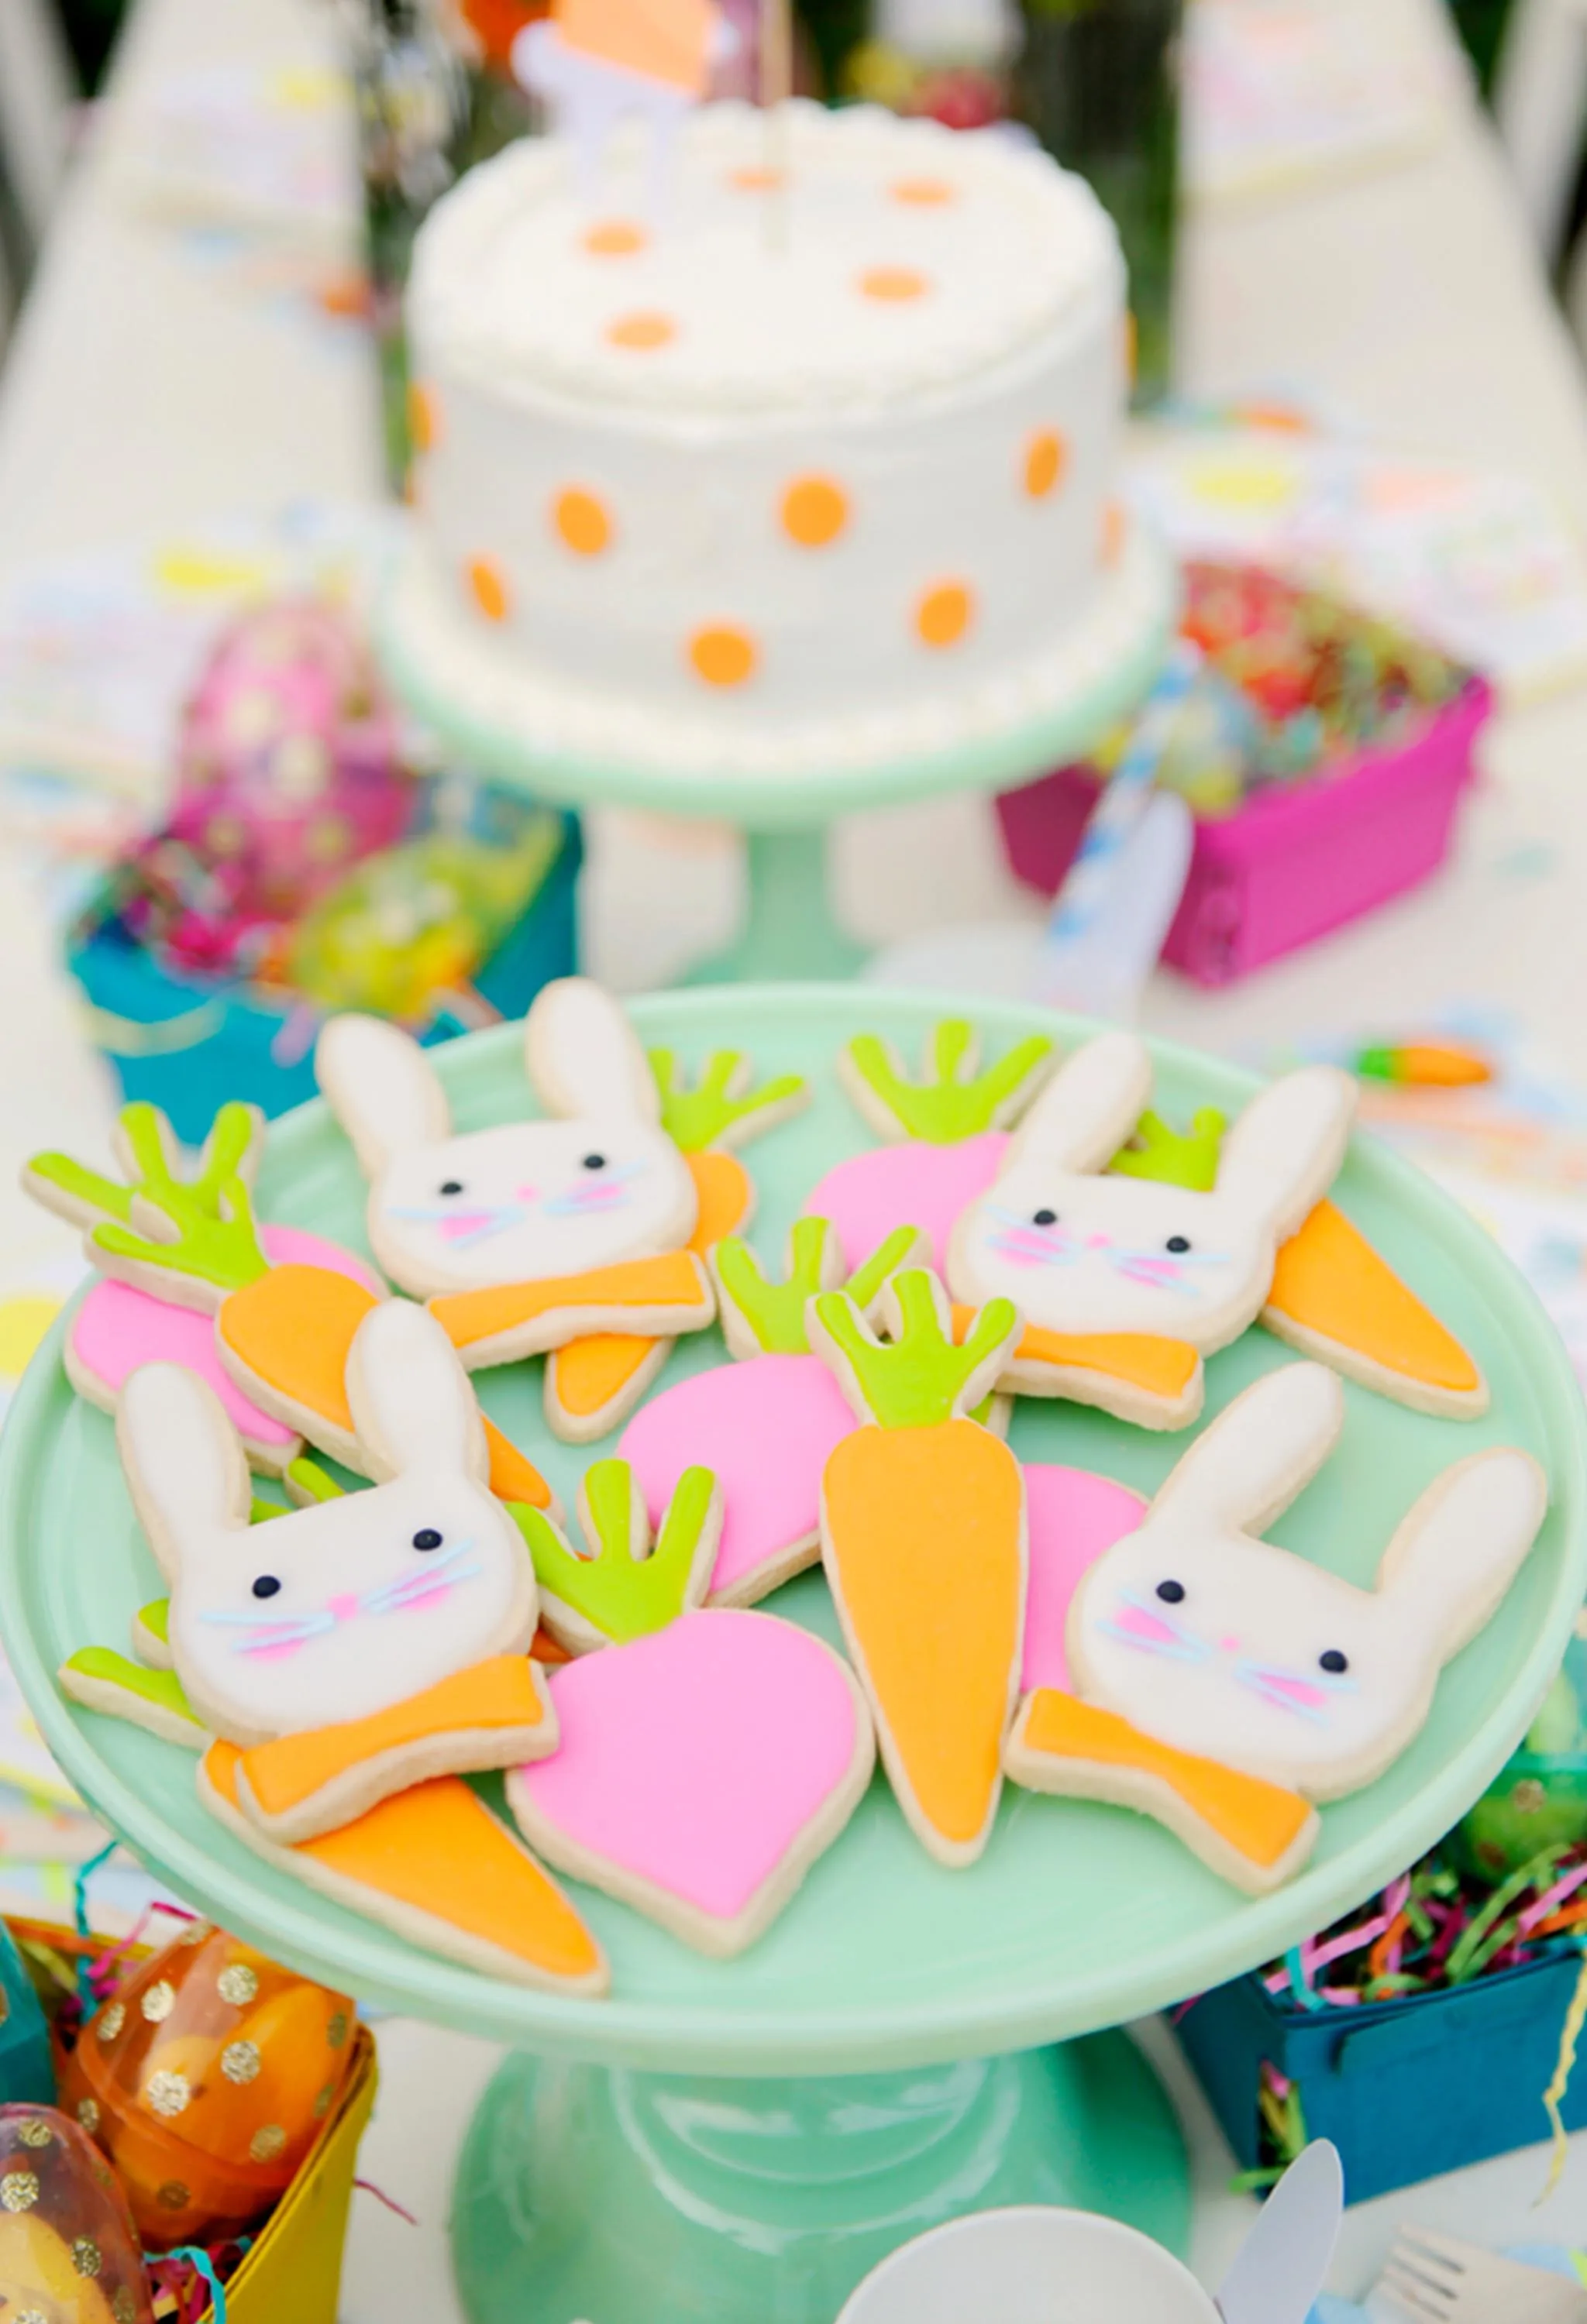 Iced Sugar Cookies for Easter